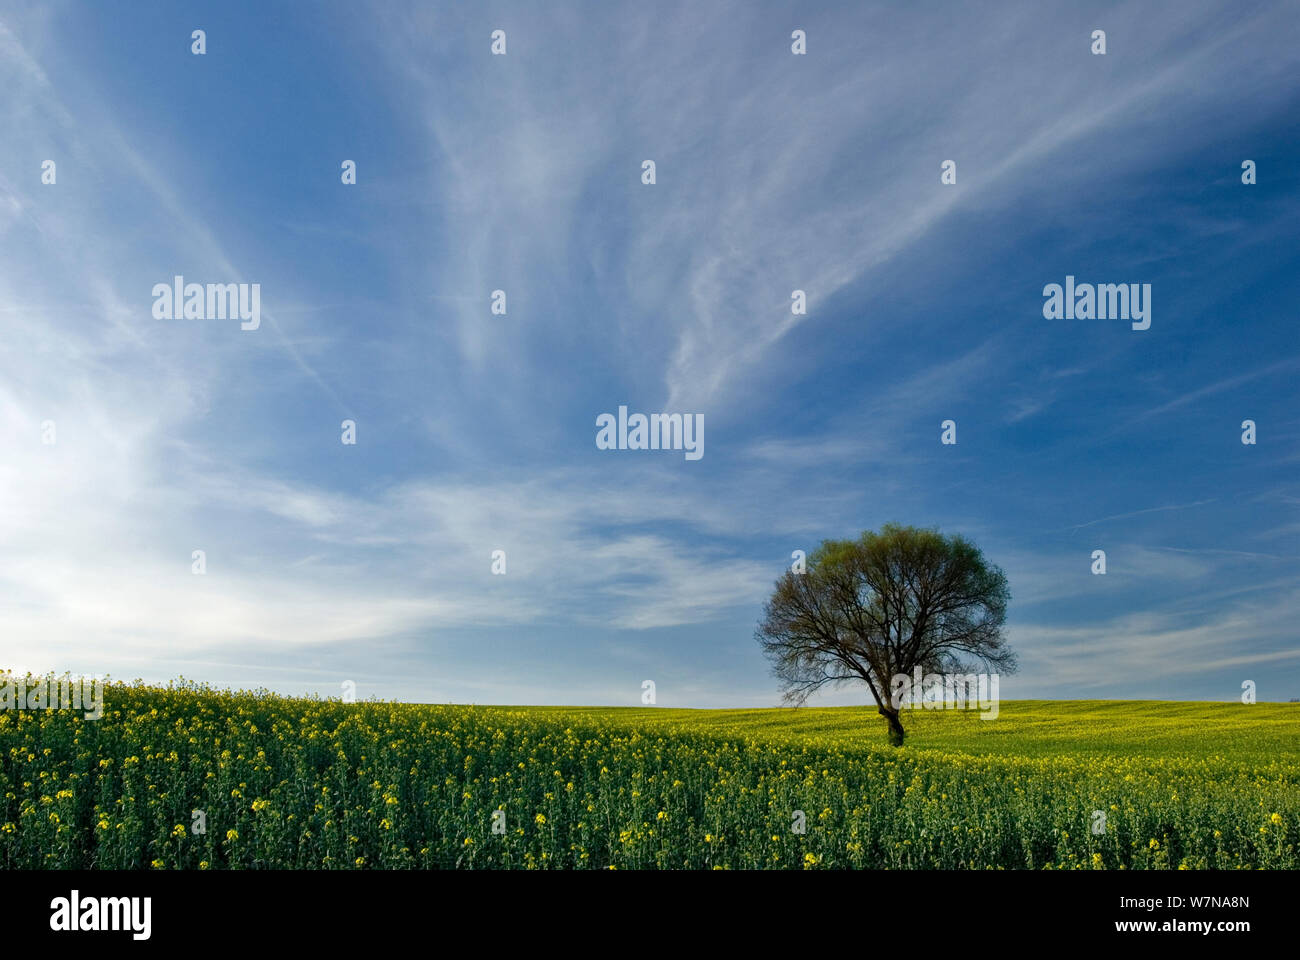 Rape field with single tree in distance, Germany. April Stock Photo